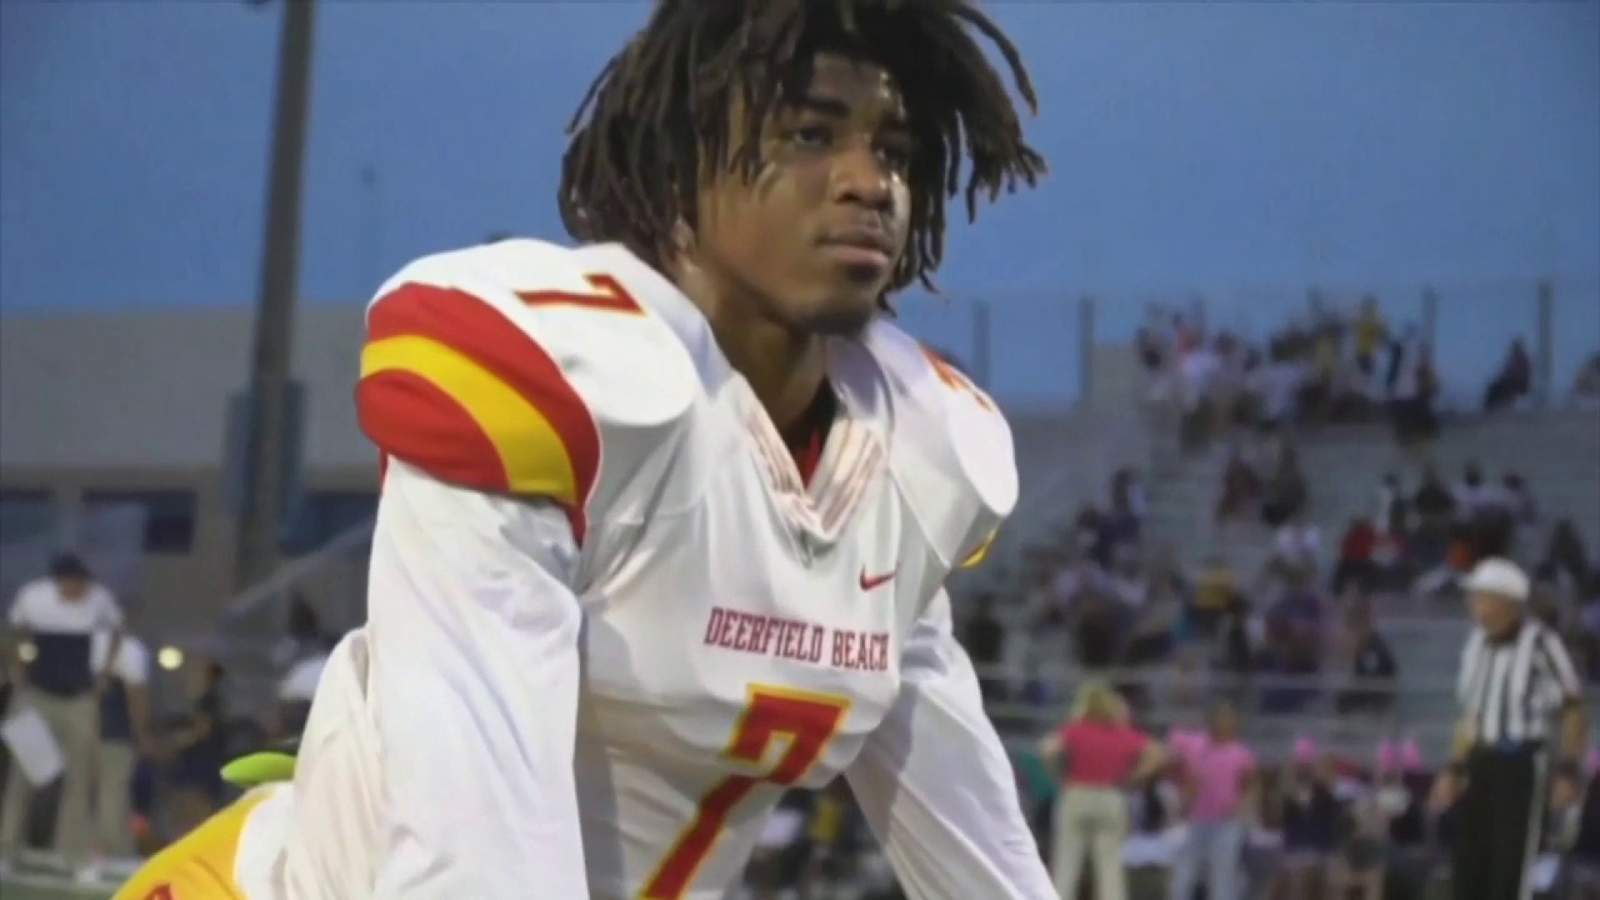 Bryce Gowdy committed suicide in December, according to the Broward medical examiner's office. He was a Deerfield High School football player who was scheduled to attend Georgia Tech on Jan. 6.